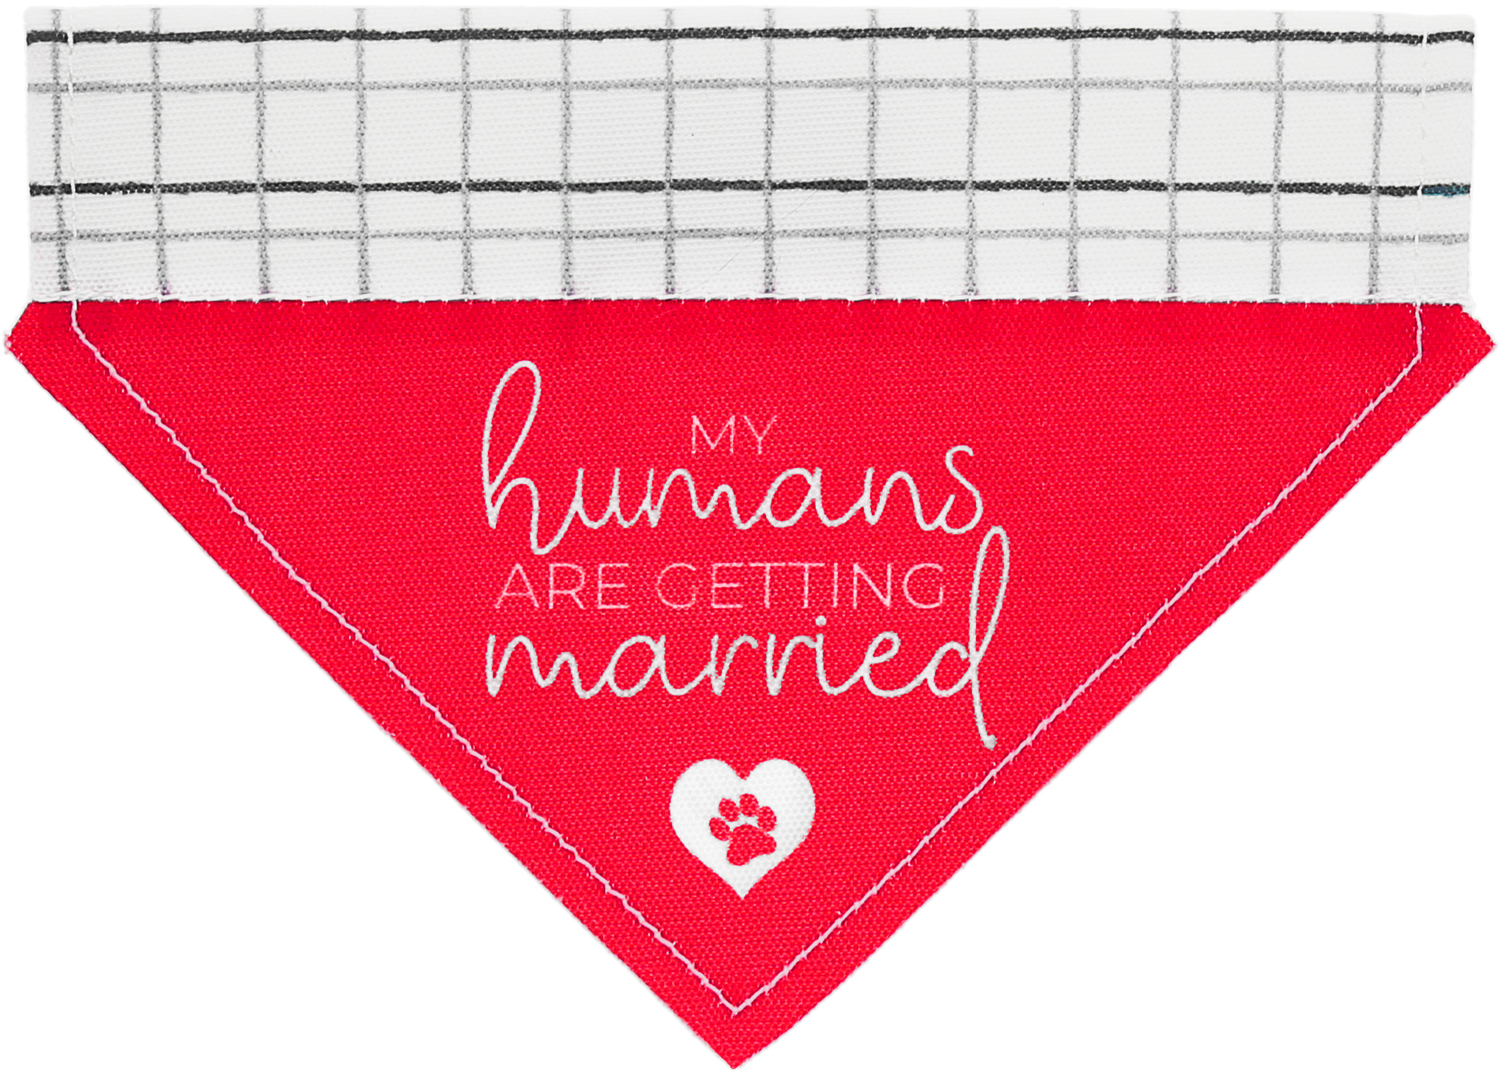 Humans Getting Married by Furever Pawsome - Humans Getting Married - 7" x 5" Canvas Slip on Pet Bandana